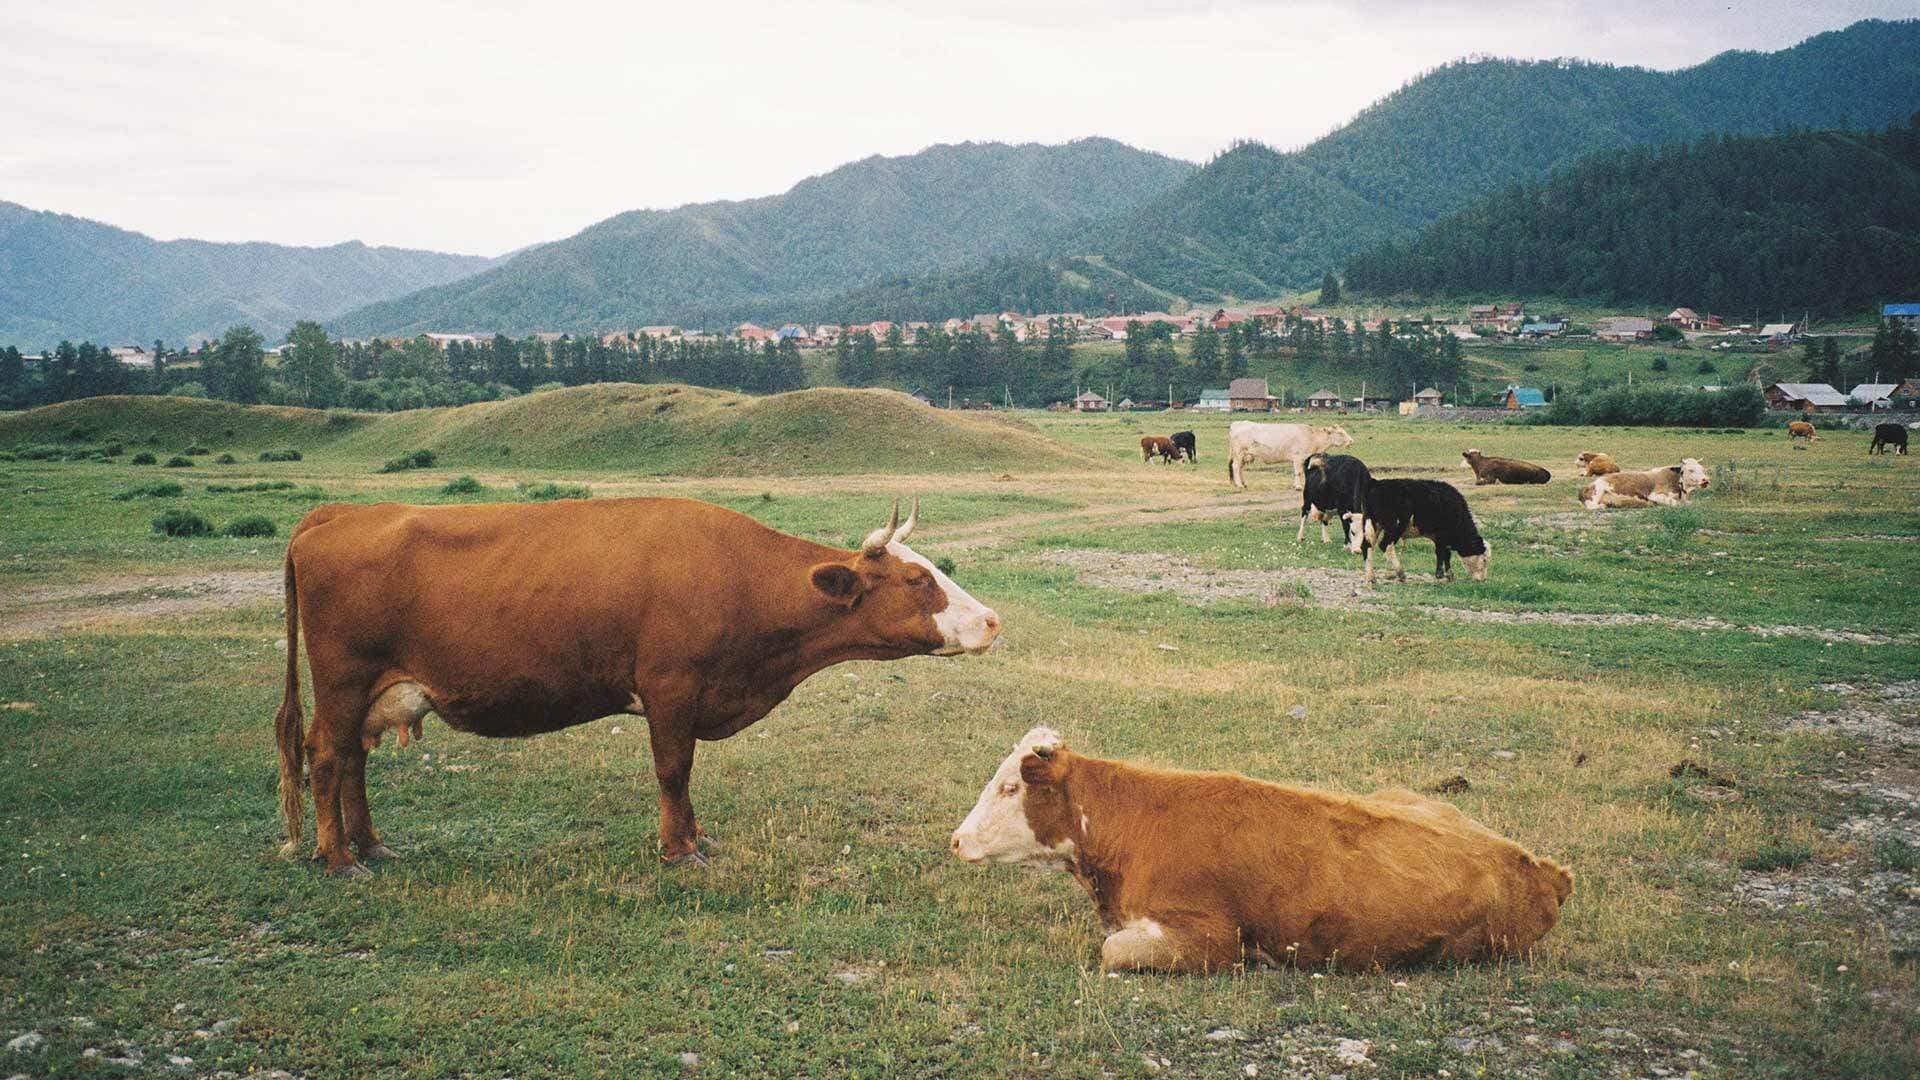 Cows sit and stand in a grassy field